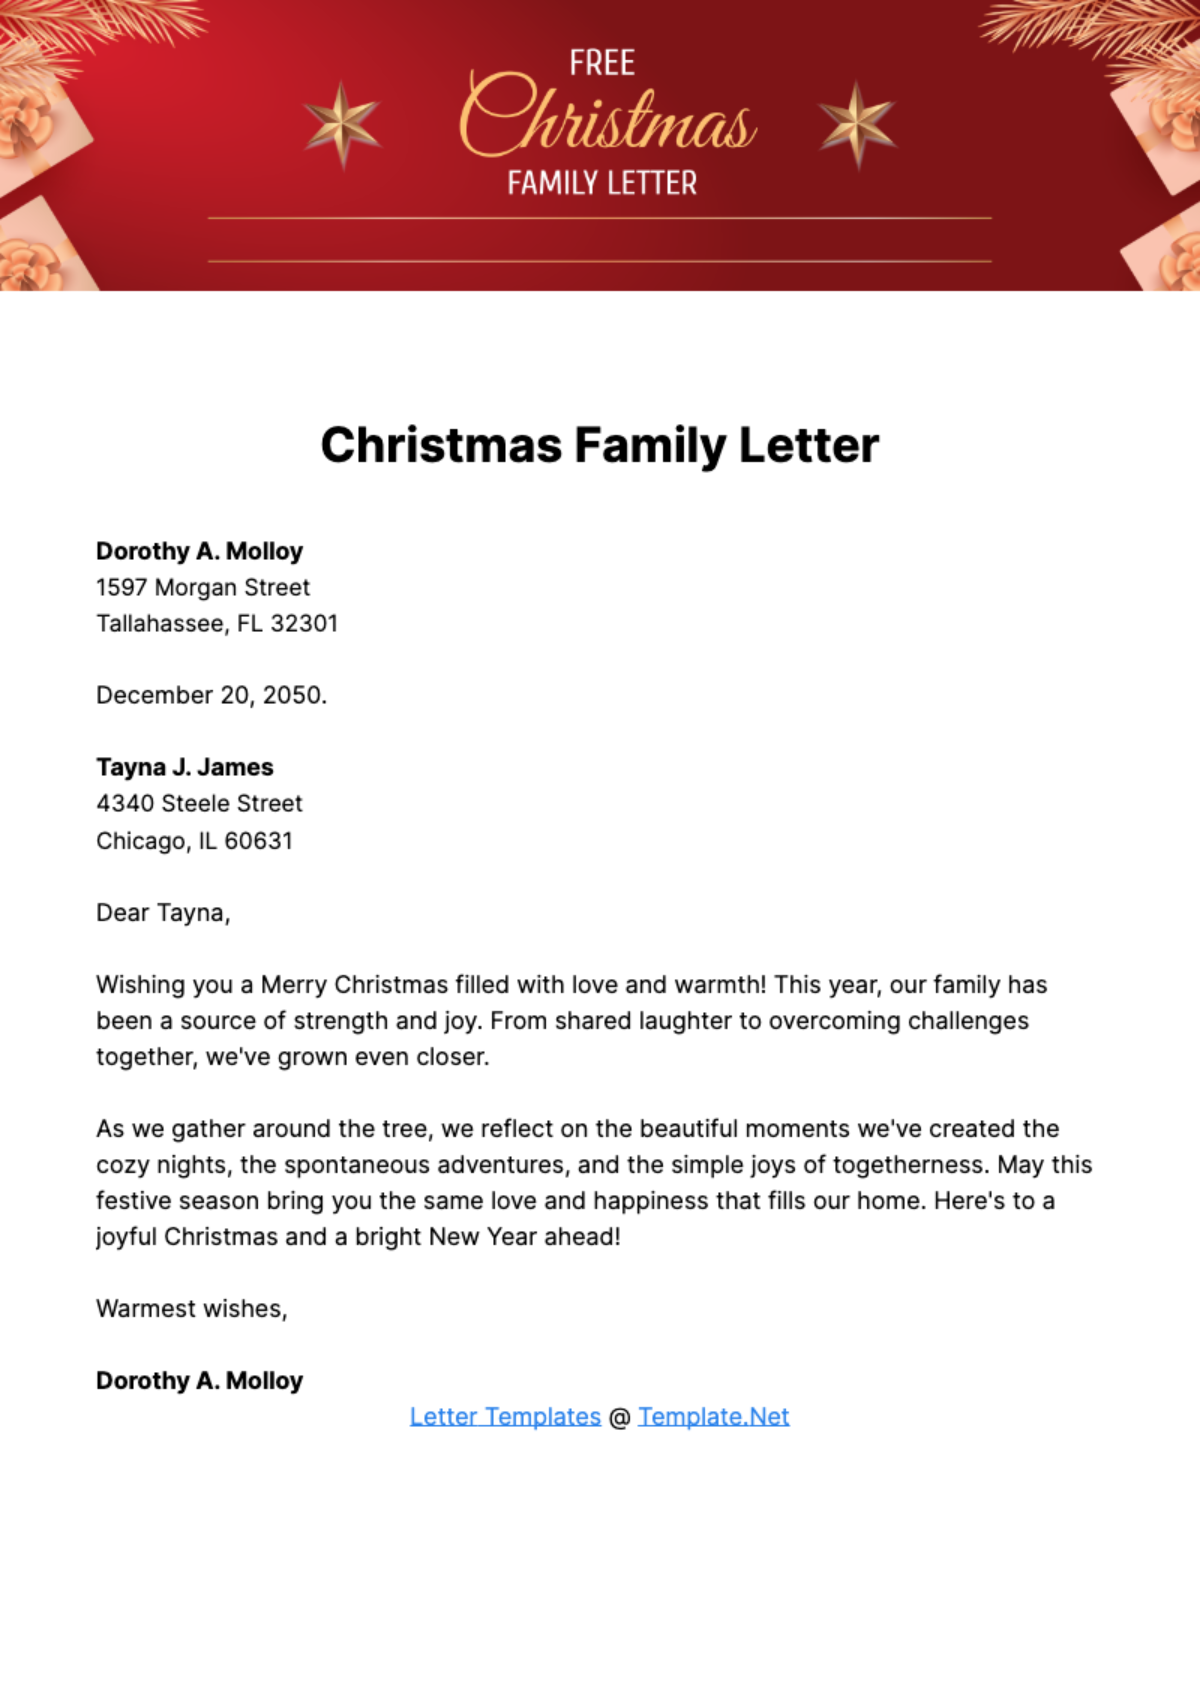 Free Christmas Family Letter Template